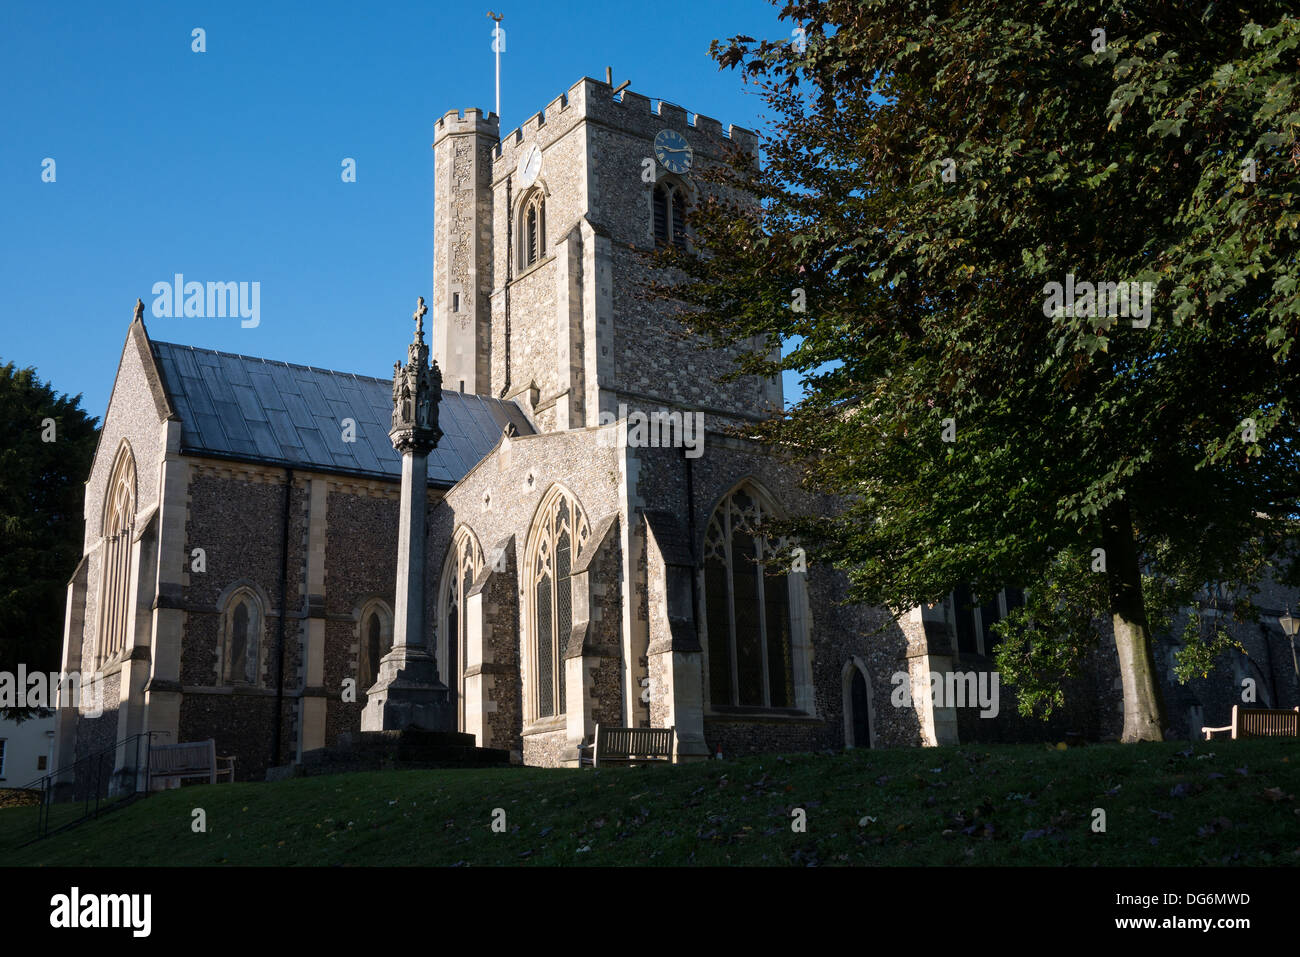 St Peters Church and the Smith Dorrien Monument  Berkhamsted, Hertfordshire UK Photo Credit: David Levenson / Alamy Stock Photo